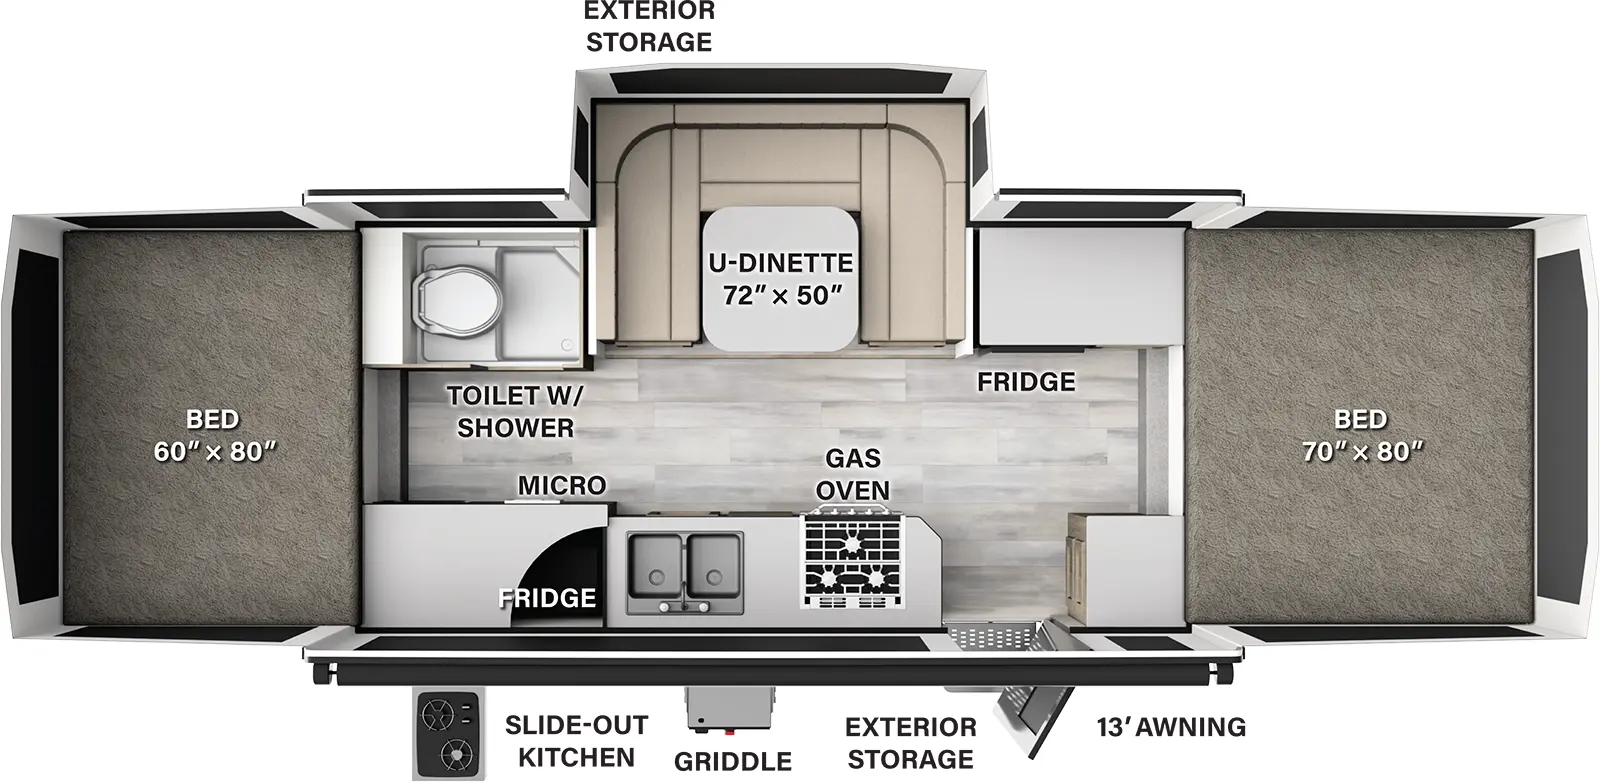 The HW277 has one slideout and one entry door. Exterior features a 13 foot awning, griddle, slideout kitchen with refrigerator and exterior storage on both sides. Interior layout front to back: front tent bed; off-door side cabinet with refrigerator, u-dinette slideout, and toilet w/shower; door side cabinet, entry, gas oven, sink, and cabinet with microwave; tent bed in the rear. 